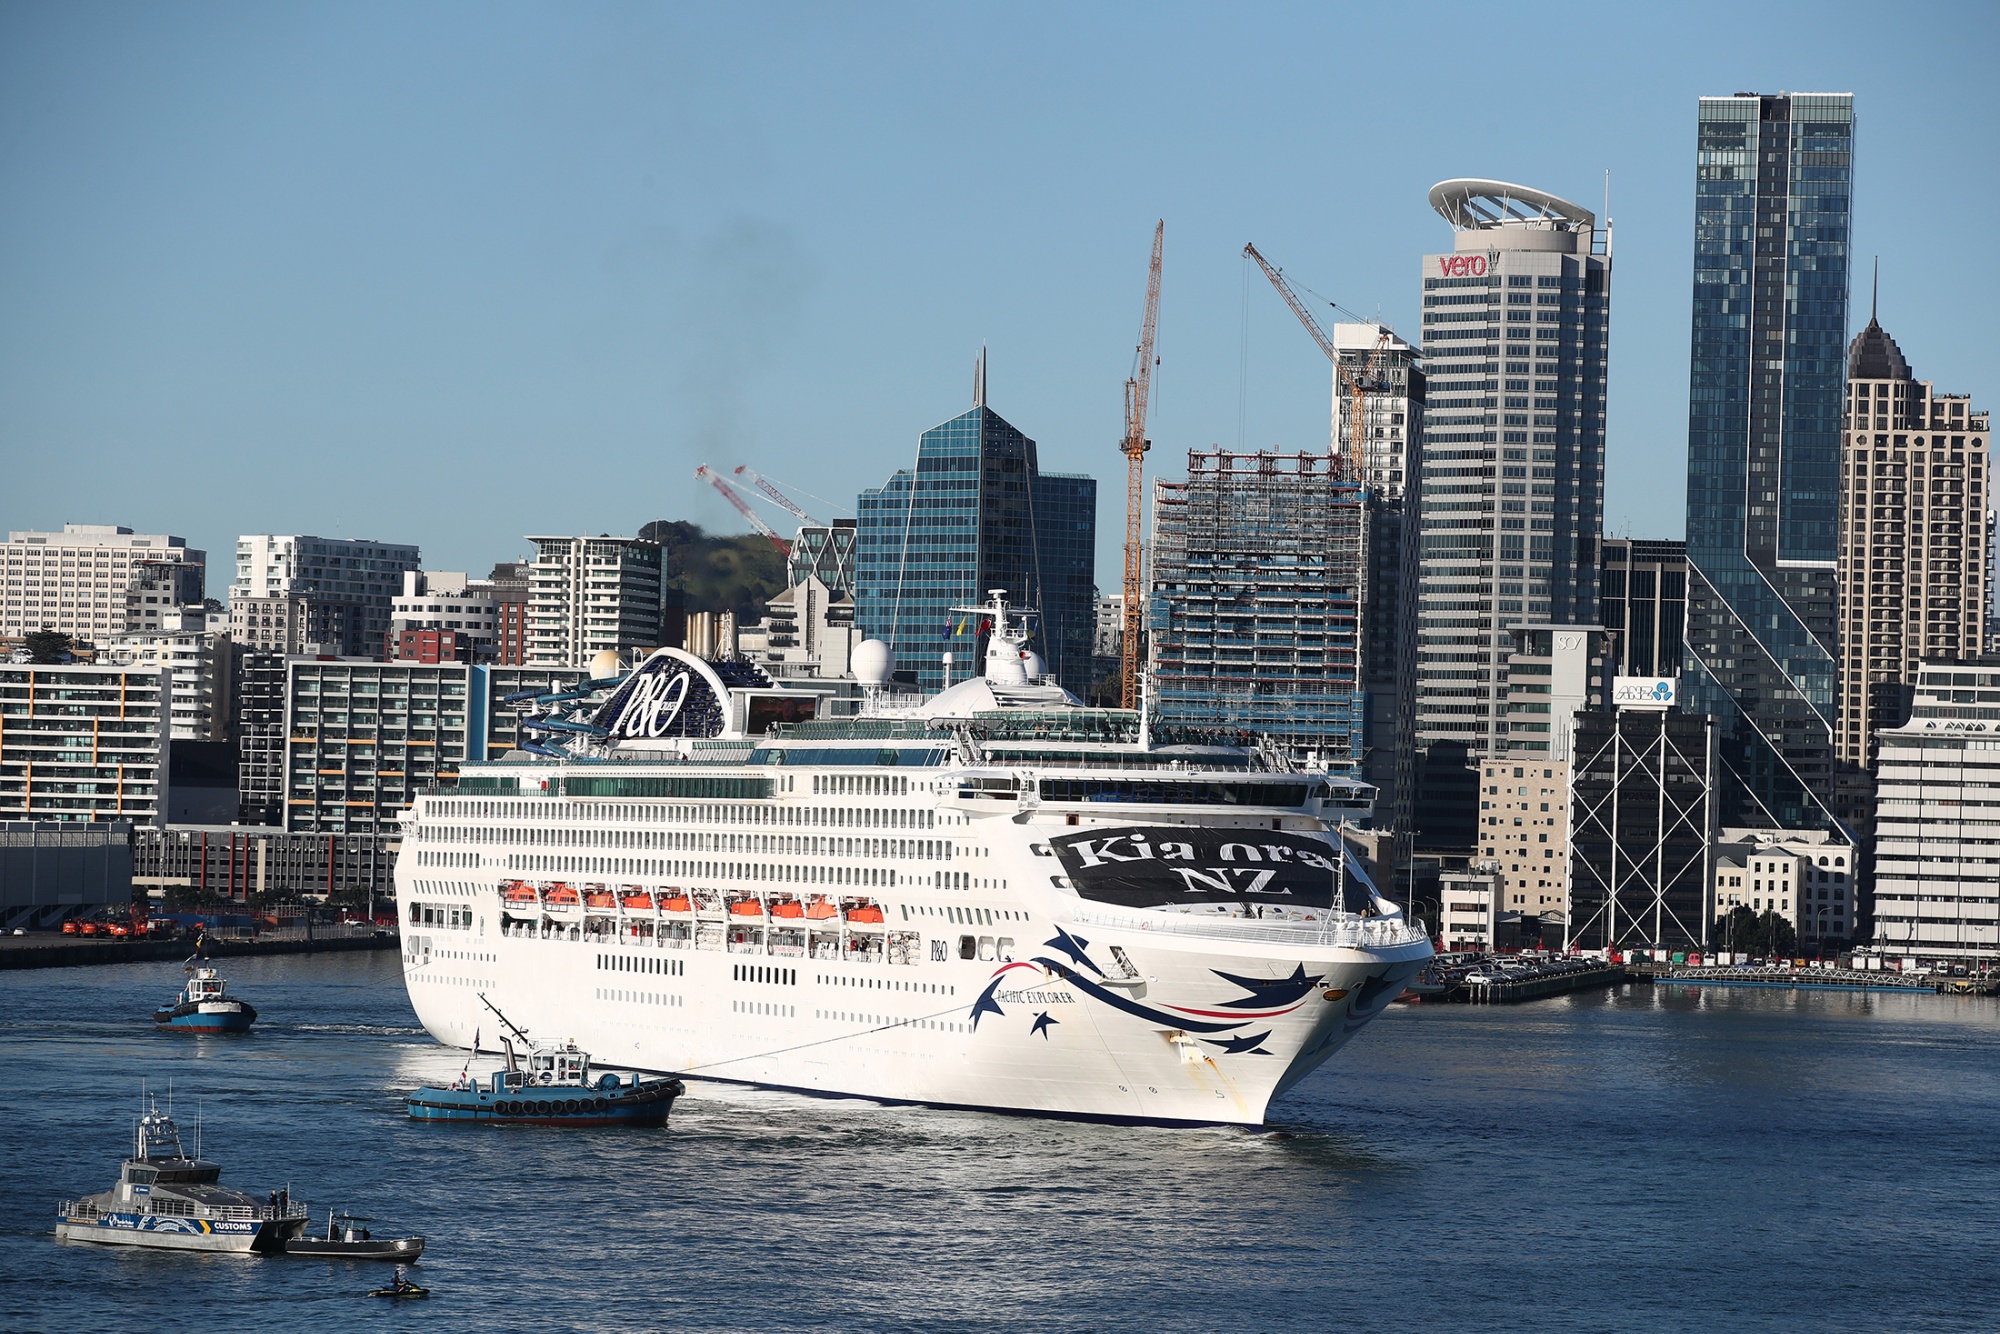 cruise ships in auckland port today